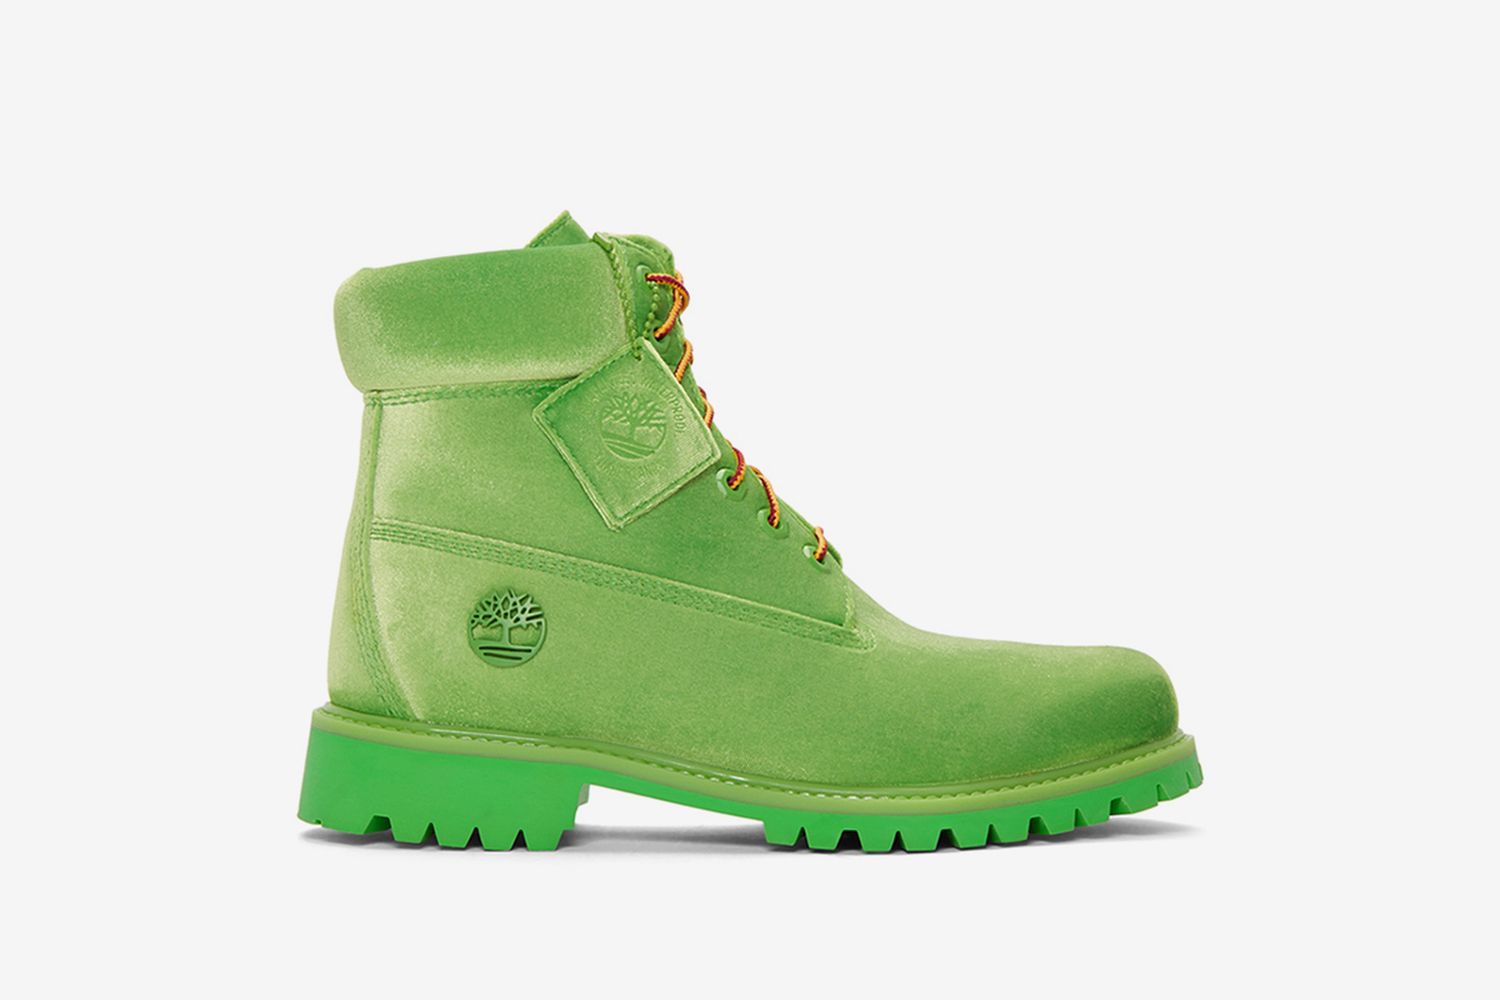 OFF–WHITE x Timberland 6 Inch Boot: Release Date, Price More